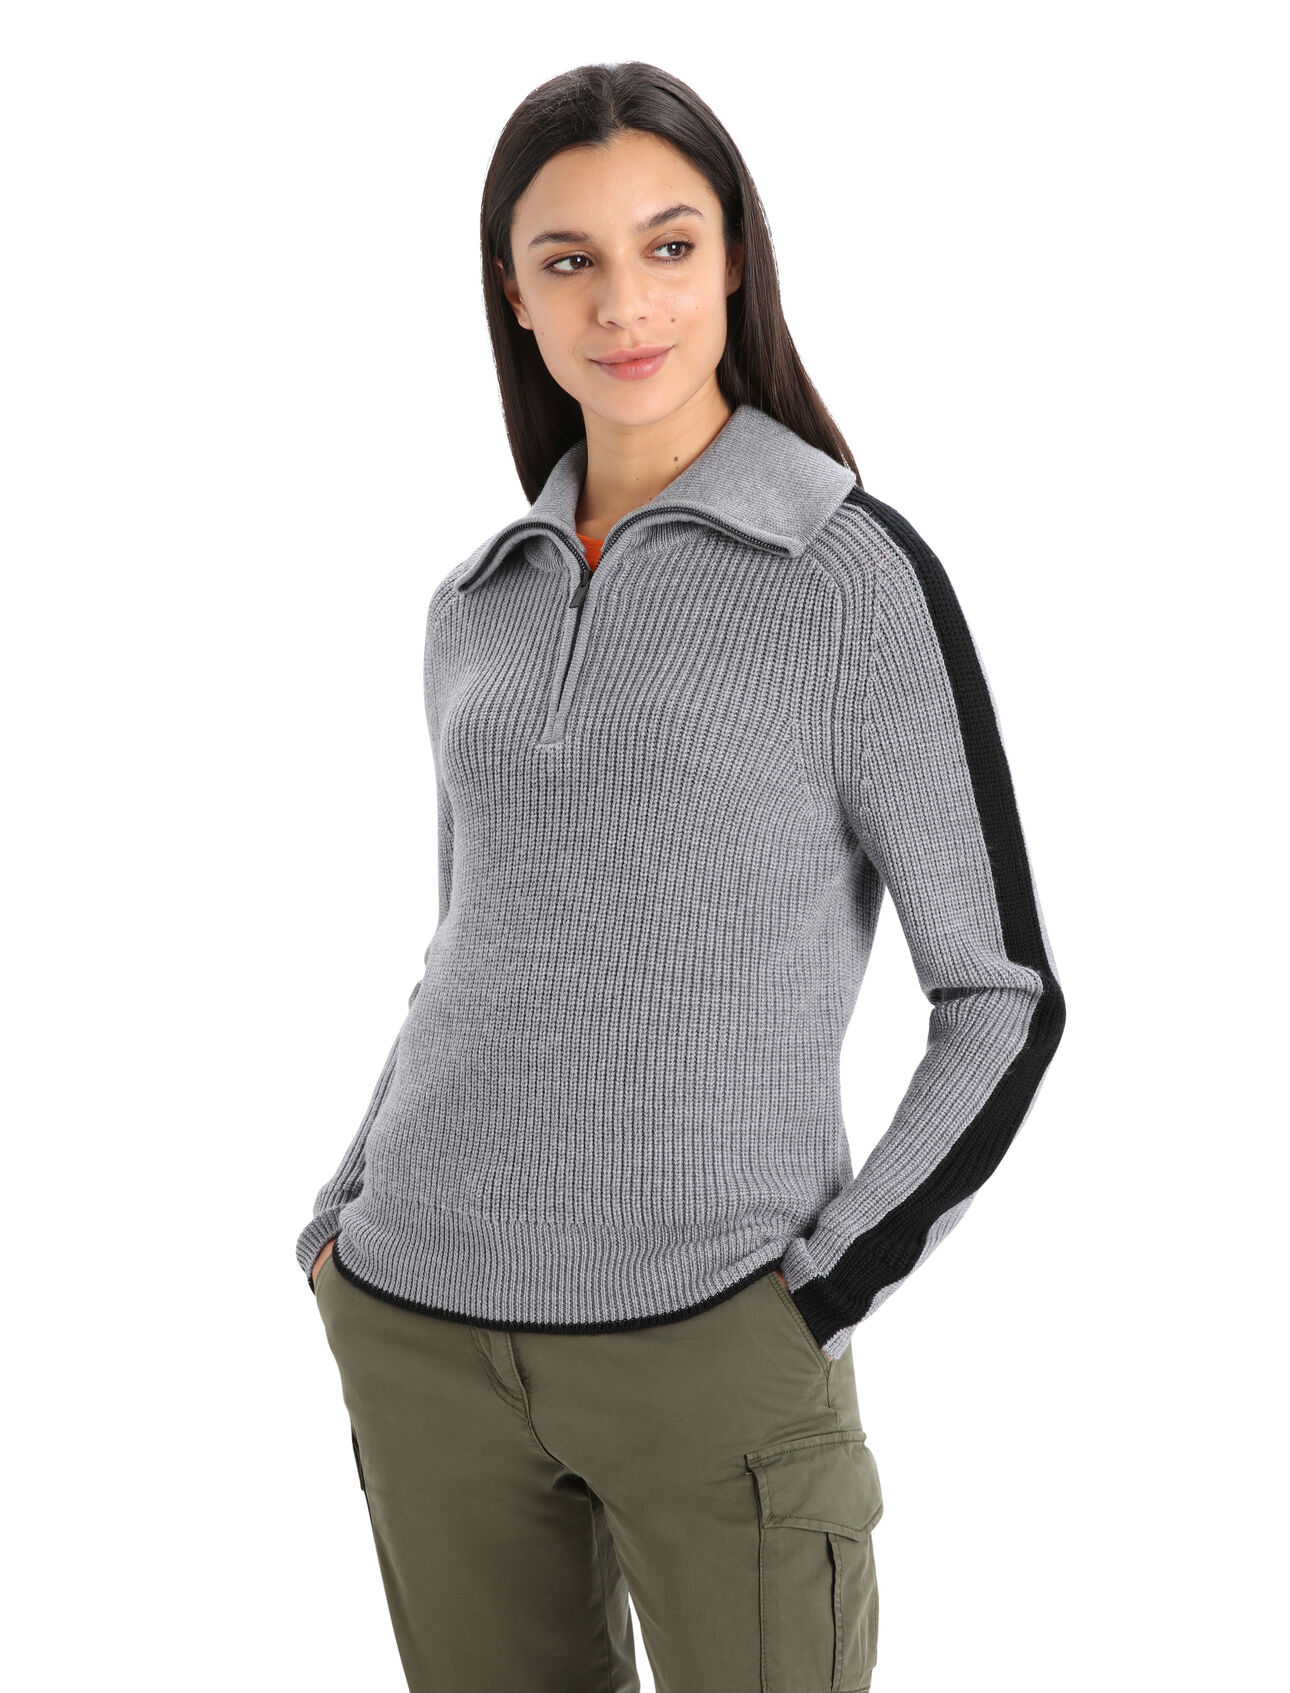 Womens Merino Lodge Long Sleeve Half Zip Sweater Inspired by our original half-zip merino pullover and reimagined with a warm, chunky knit and classic ski style, the Lodge Long Sleeve Half Zip Sweater is the quintessential cold-weather style piece.